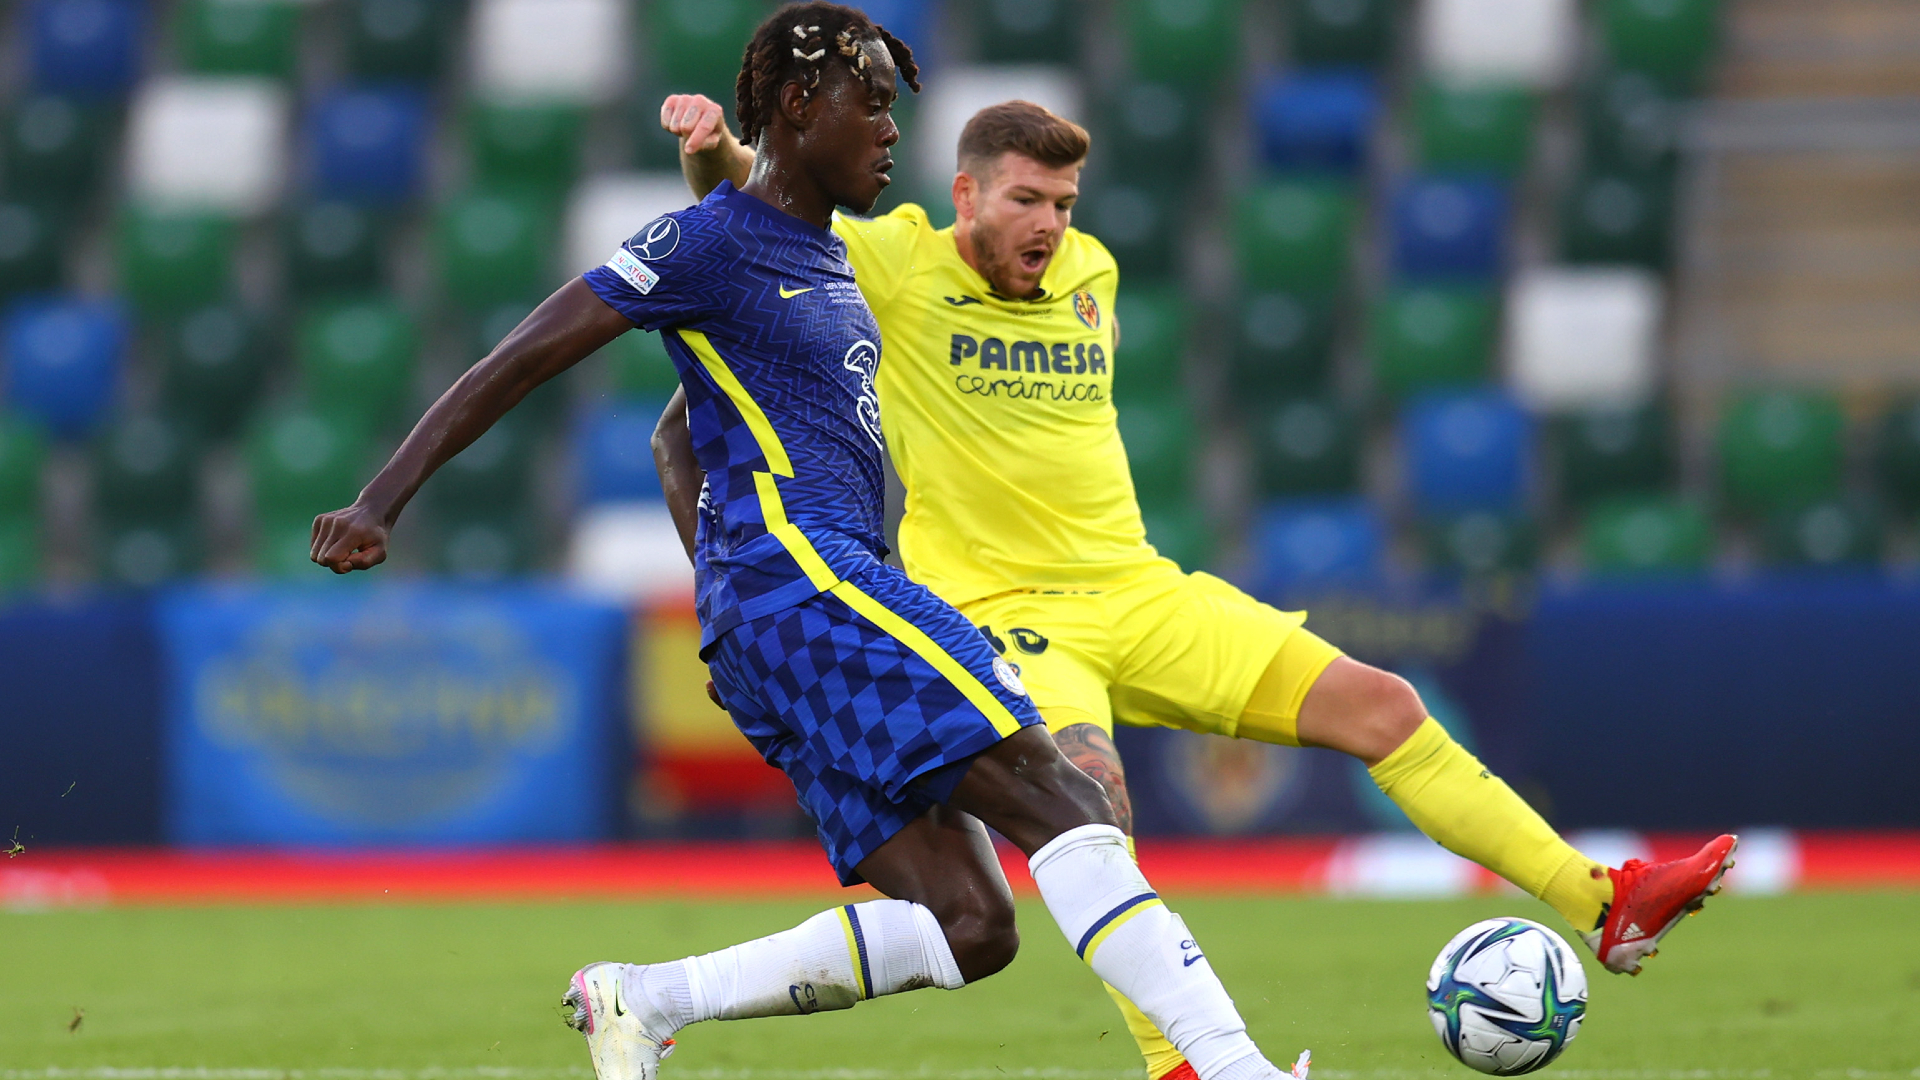 'He has forced his way into our thinking' - Chelsea boss Tuchel says Chalobah could stay with Blues this season